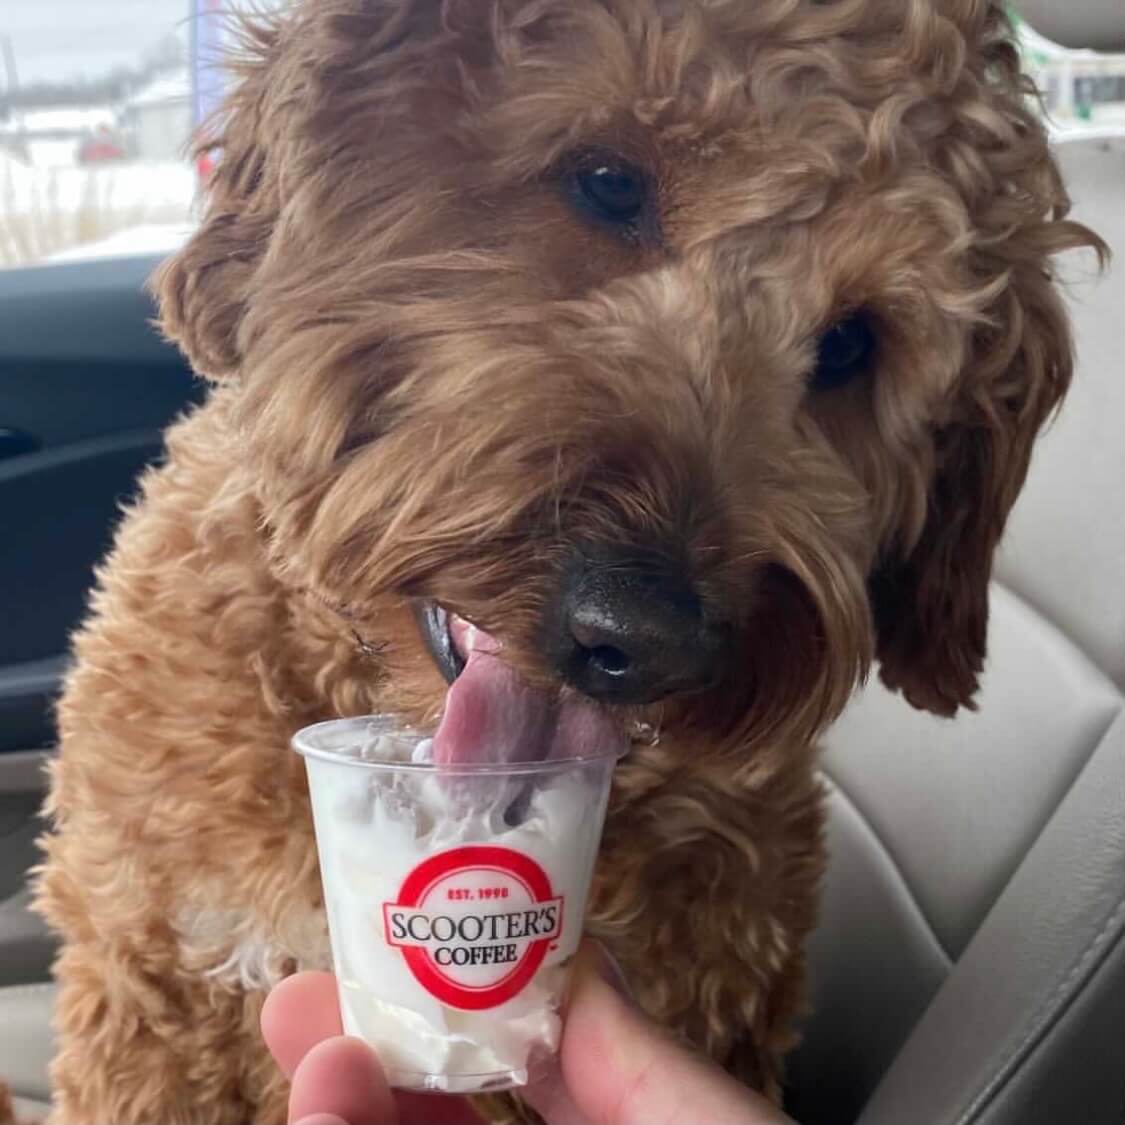 Dog in car licking whipped cream from a pup cup